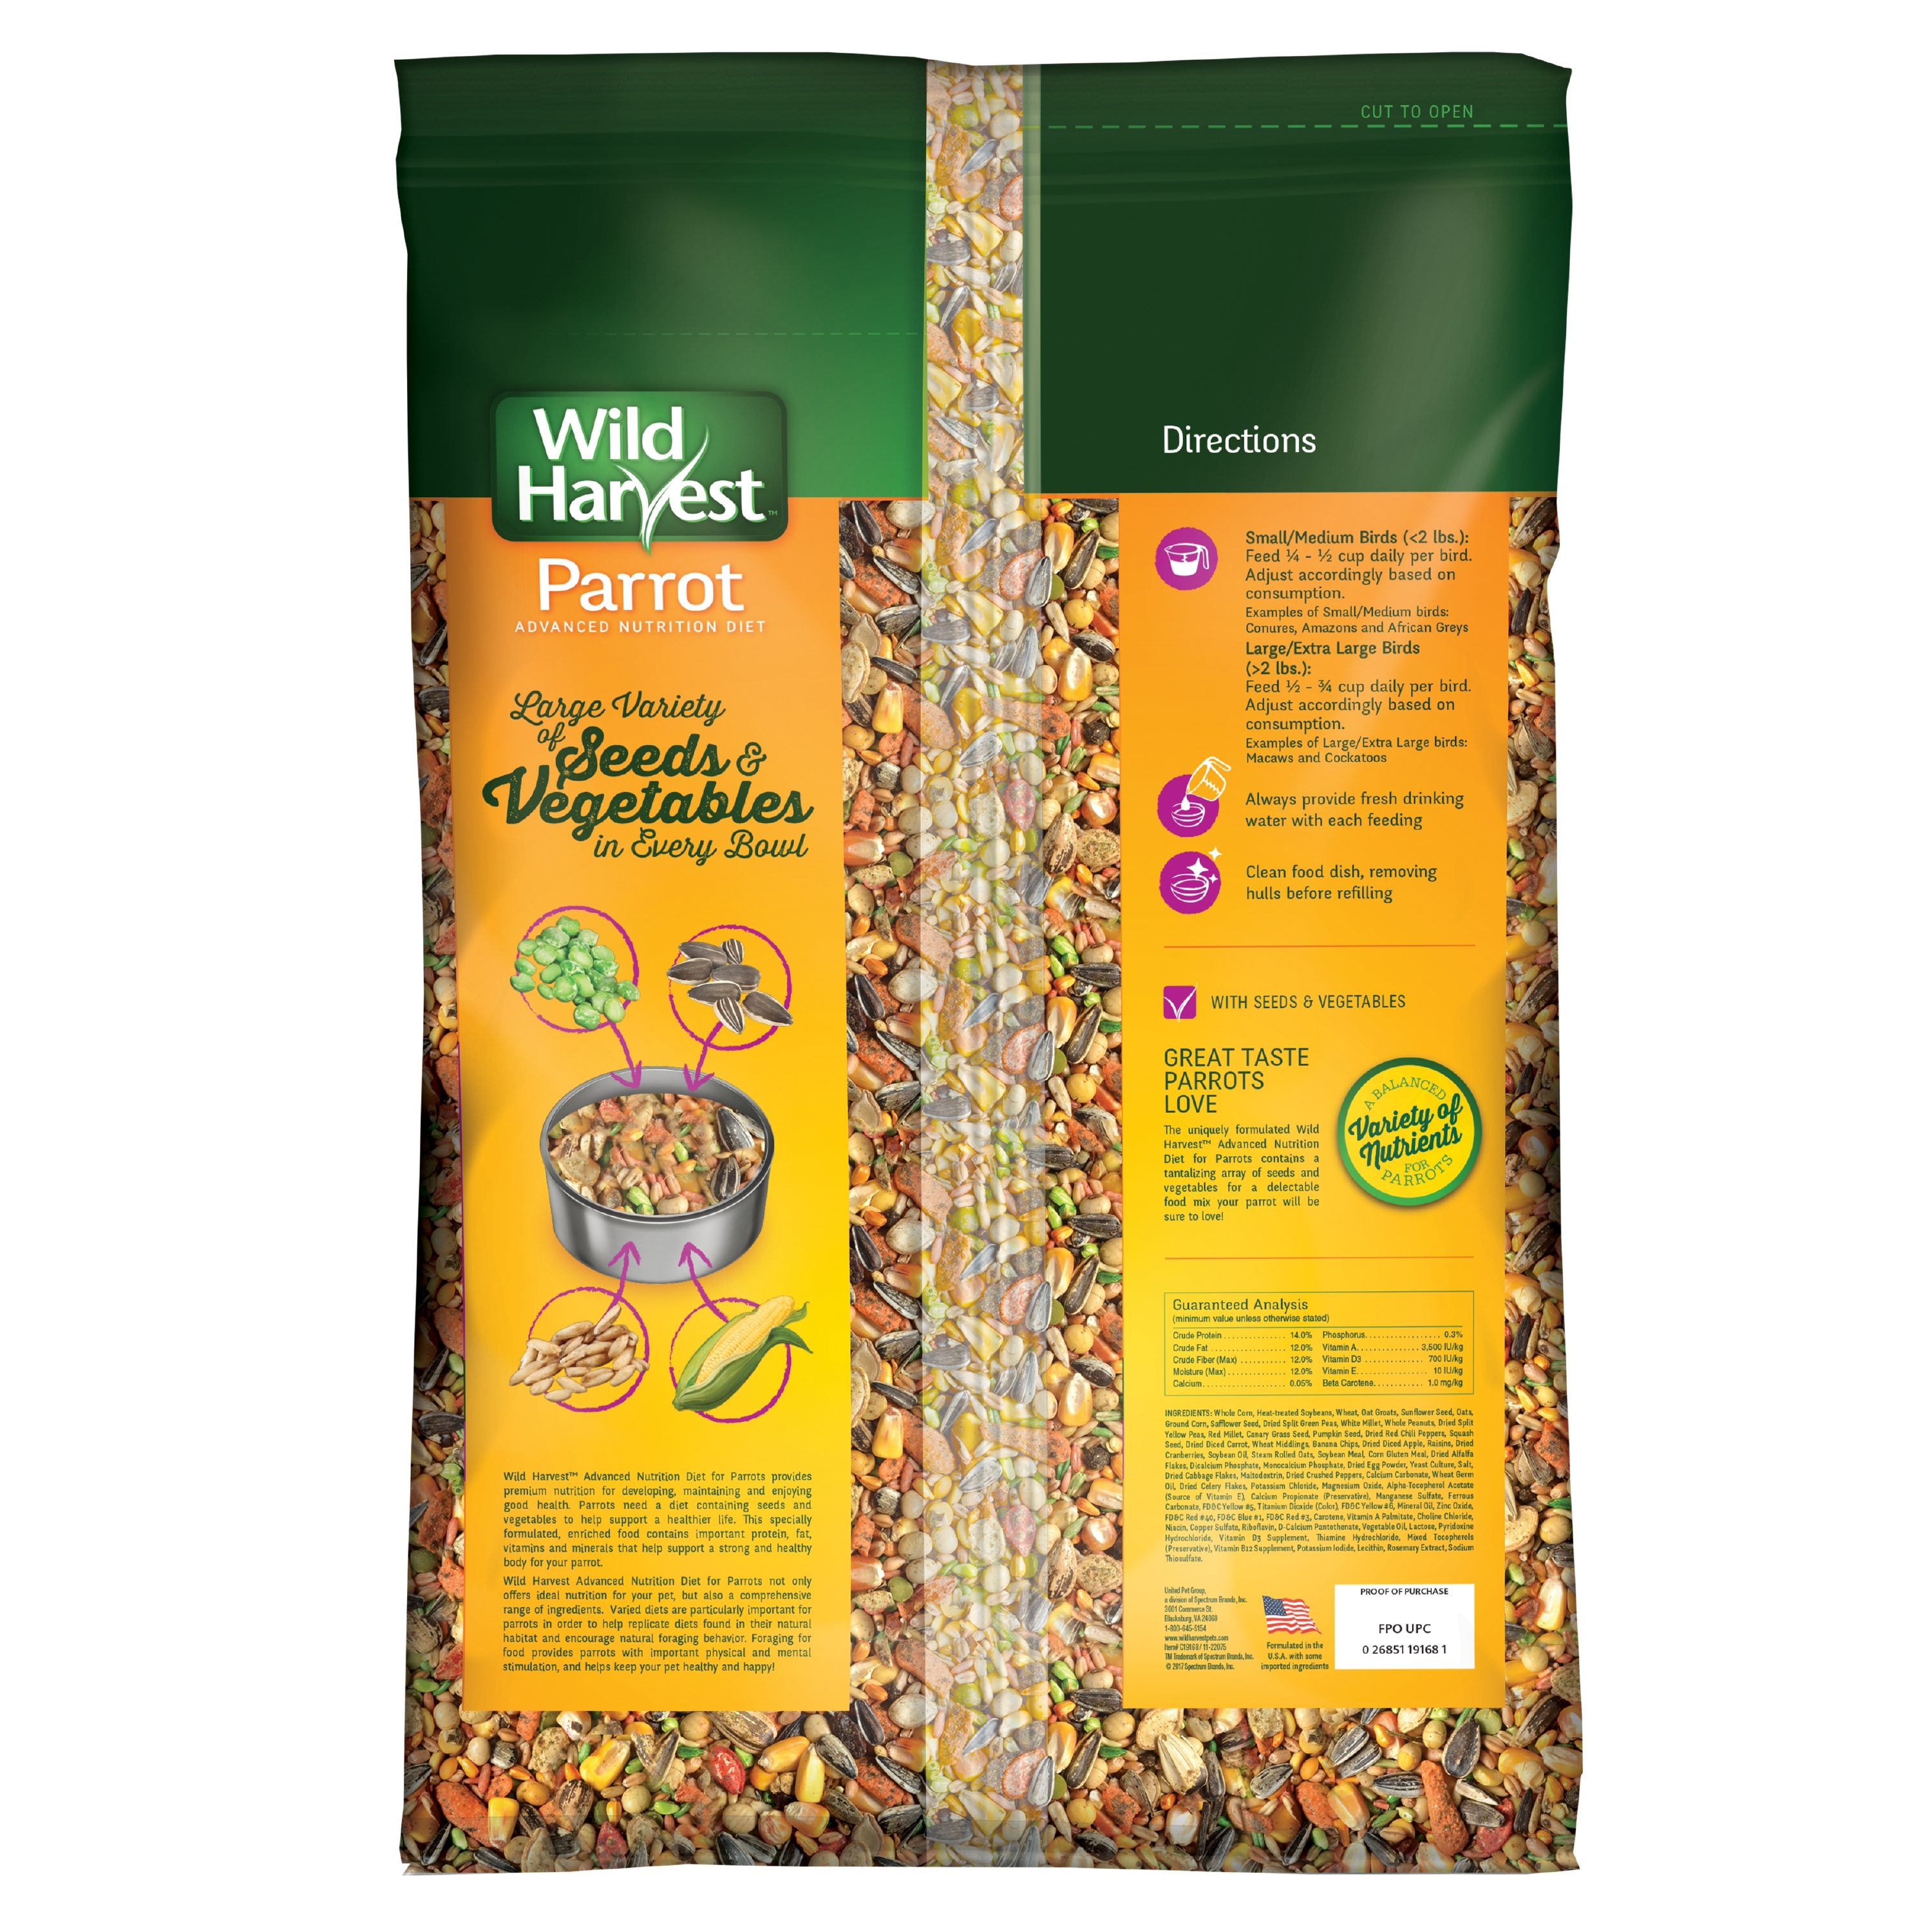 Wild Harvest Parrot Advanced Nutrition Diet Dry Bird Food, 8 lbs - image 2 of 4